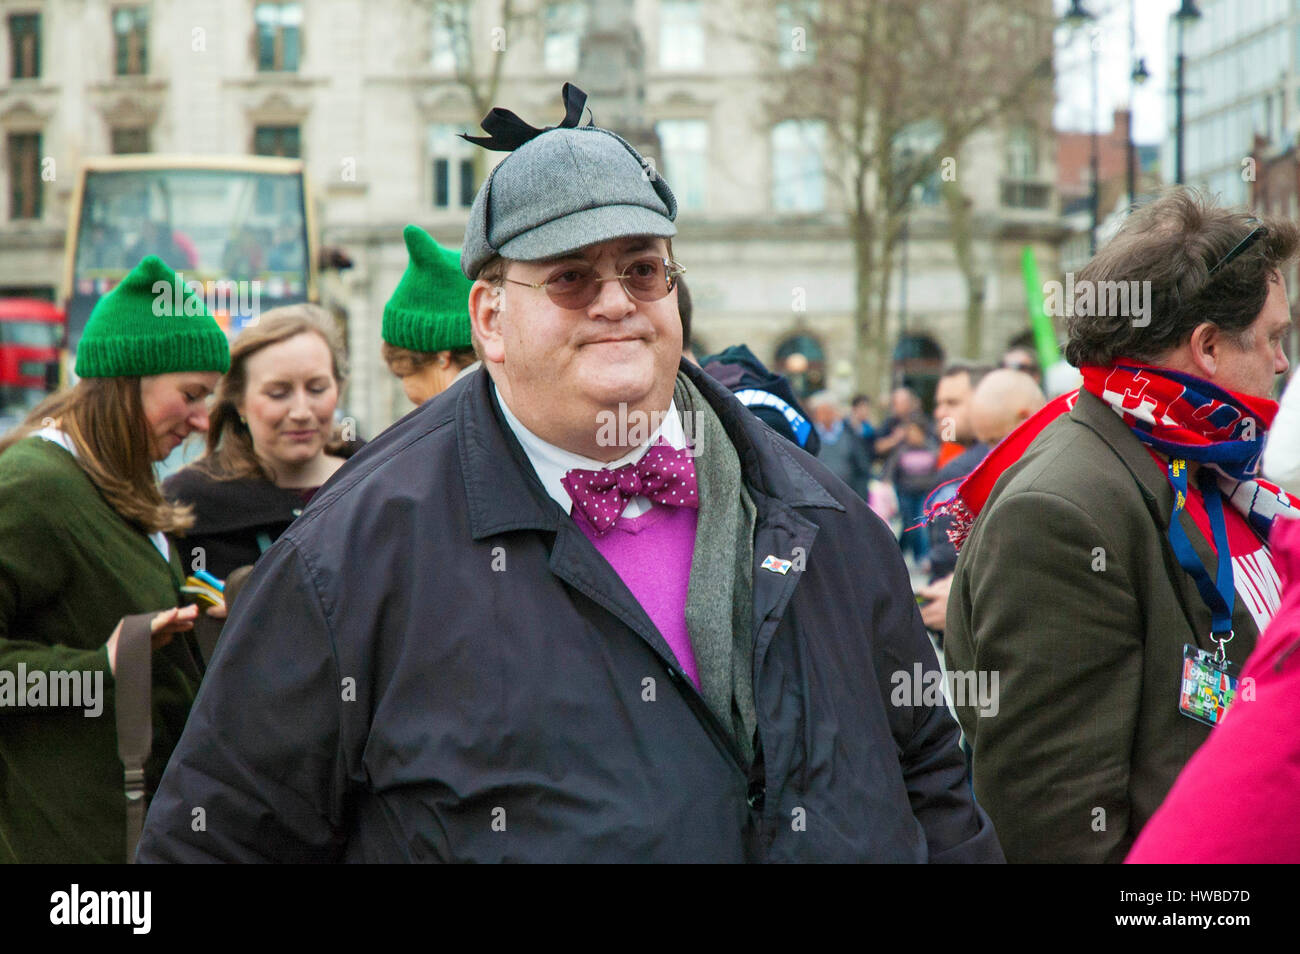 London, UK. 19th March, 2017. Spectators attend the annual St Patricks day parade. Credit: JOHNNY ARMSTEAD/Alamy Live News Stock Photo